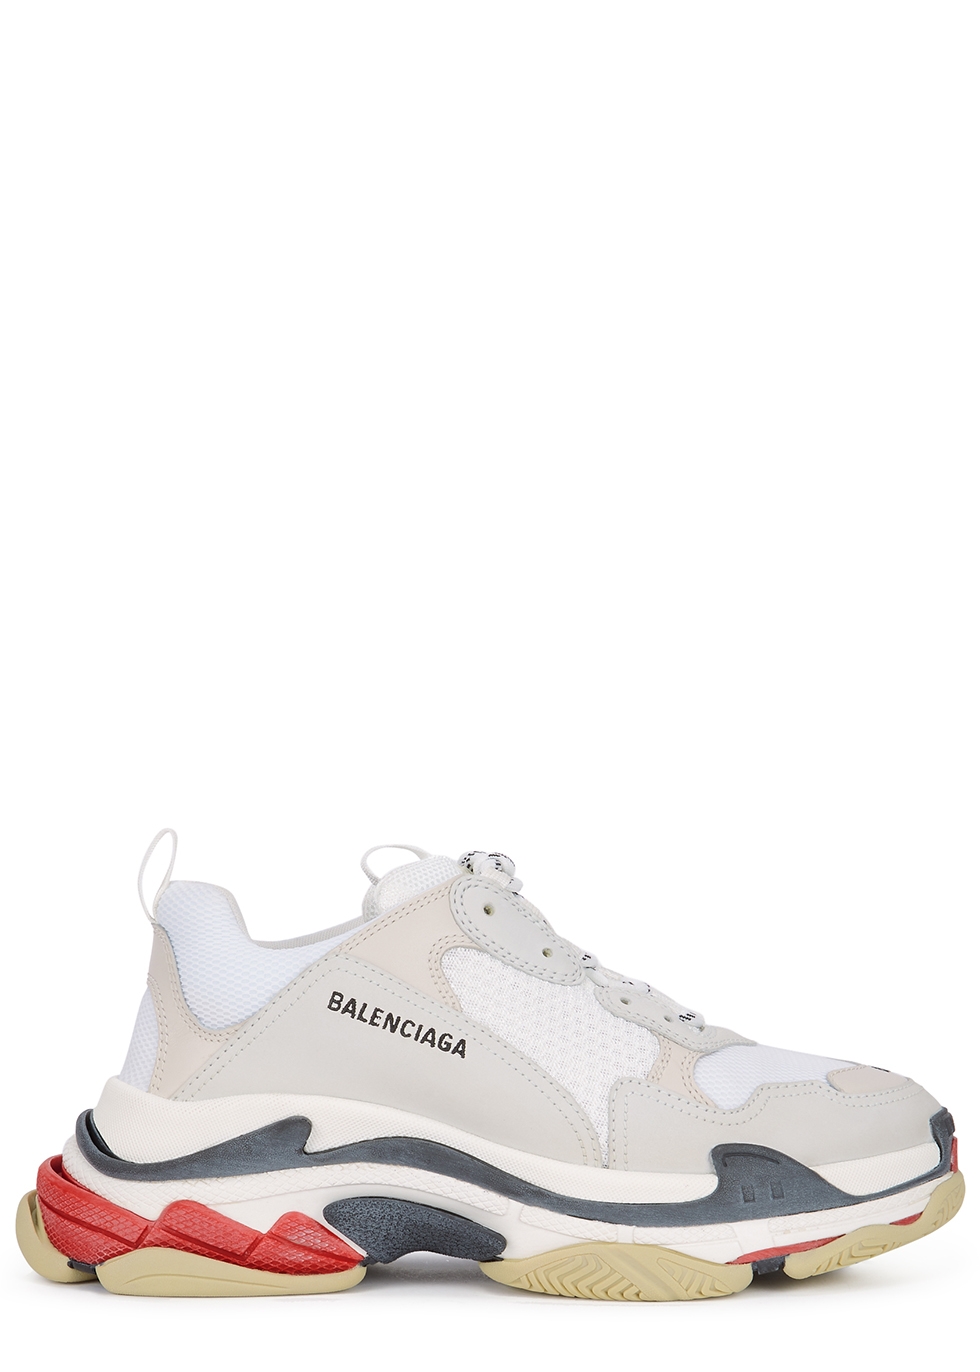 Balenciaga Triple S White W 2018 Reis recommended by h